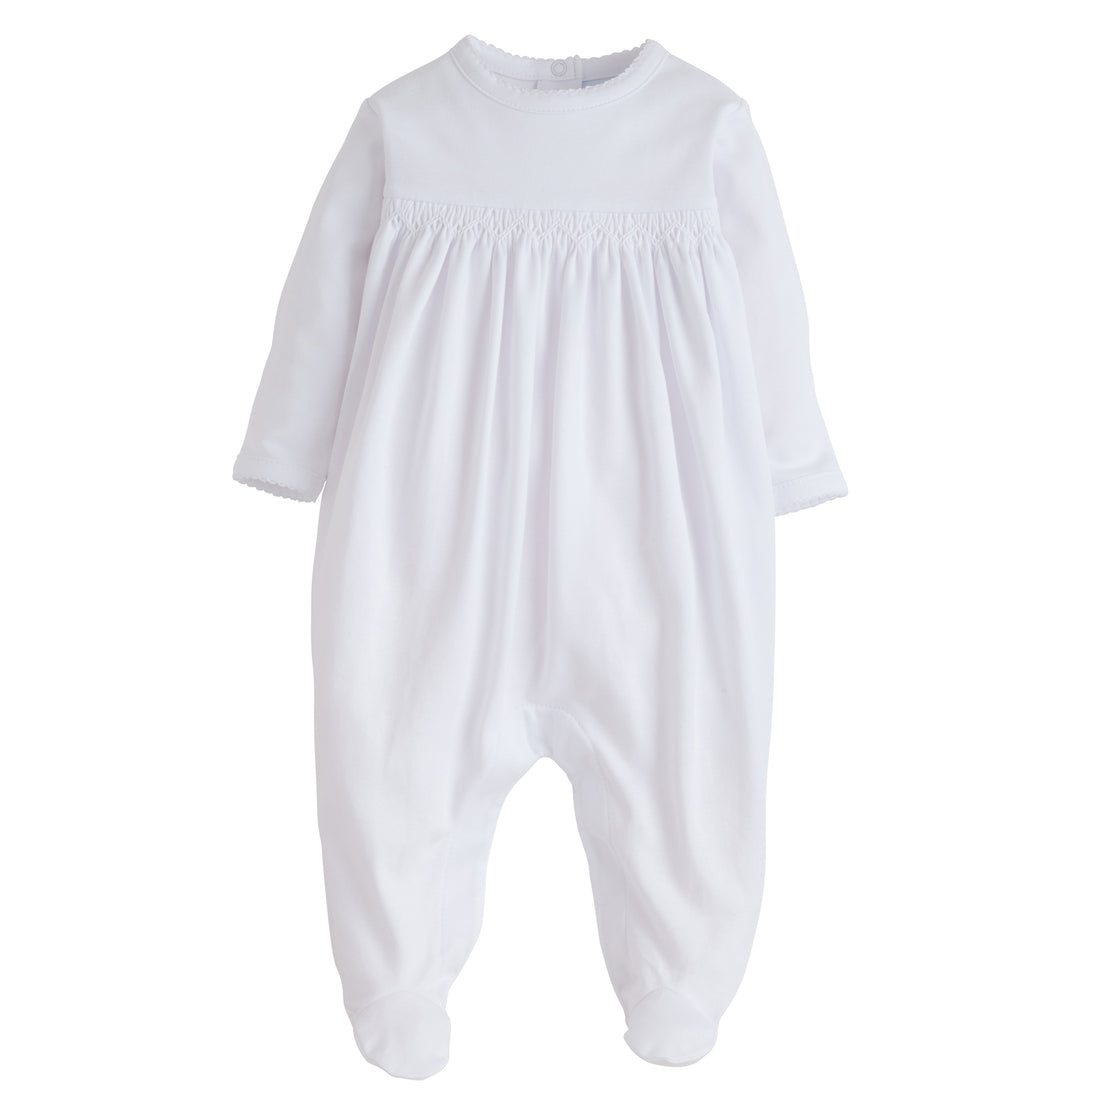 Little English smocked footie for baby, soft white cotton with picot trim